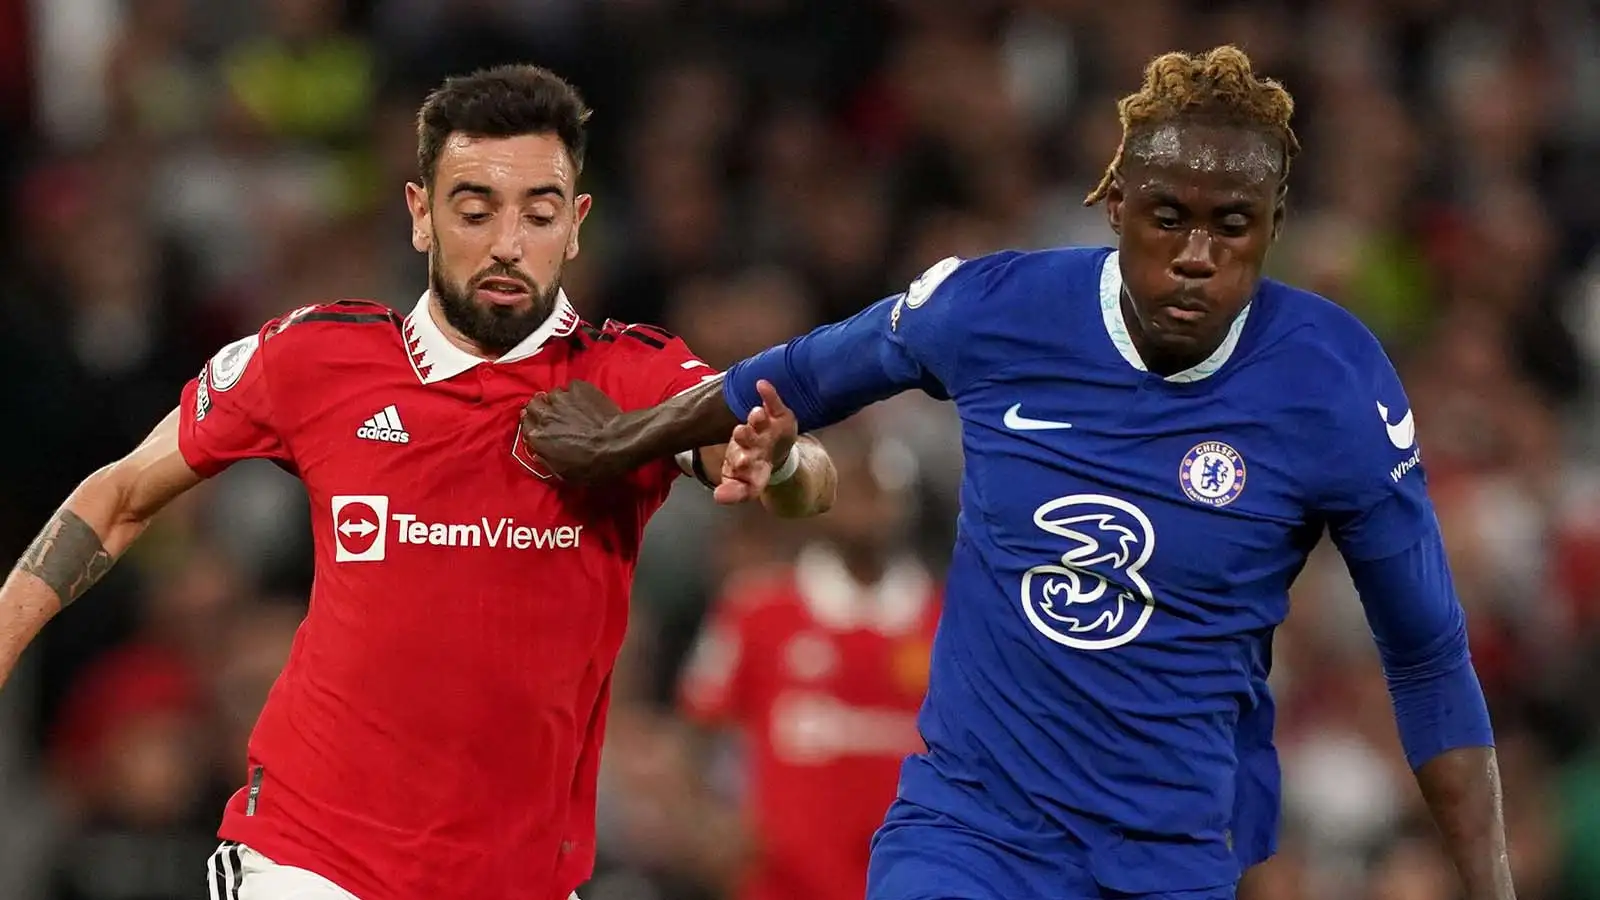 Manchester United's Bruno Fernandes (left) and Chelsea's Trevoh Chalobah in action